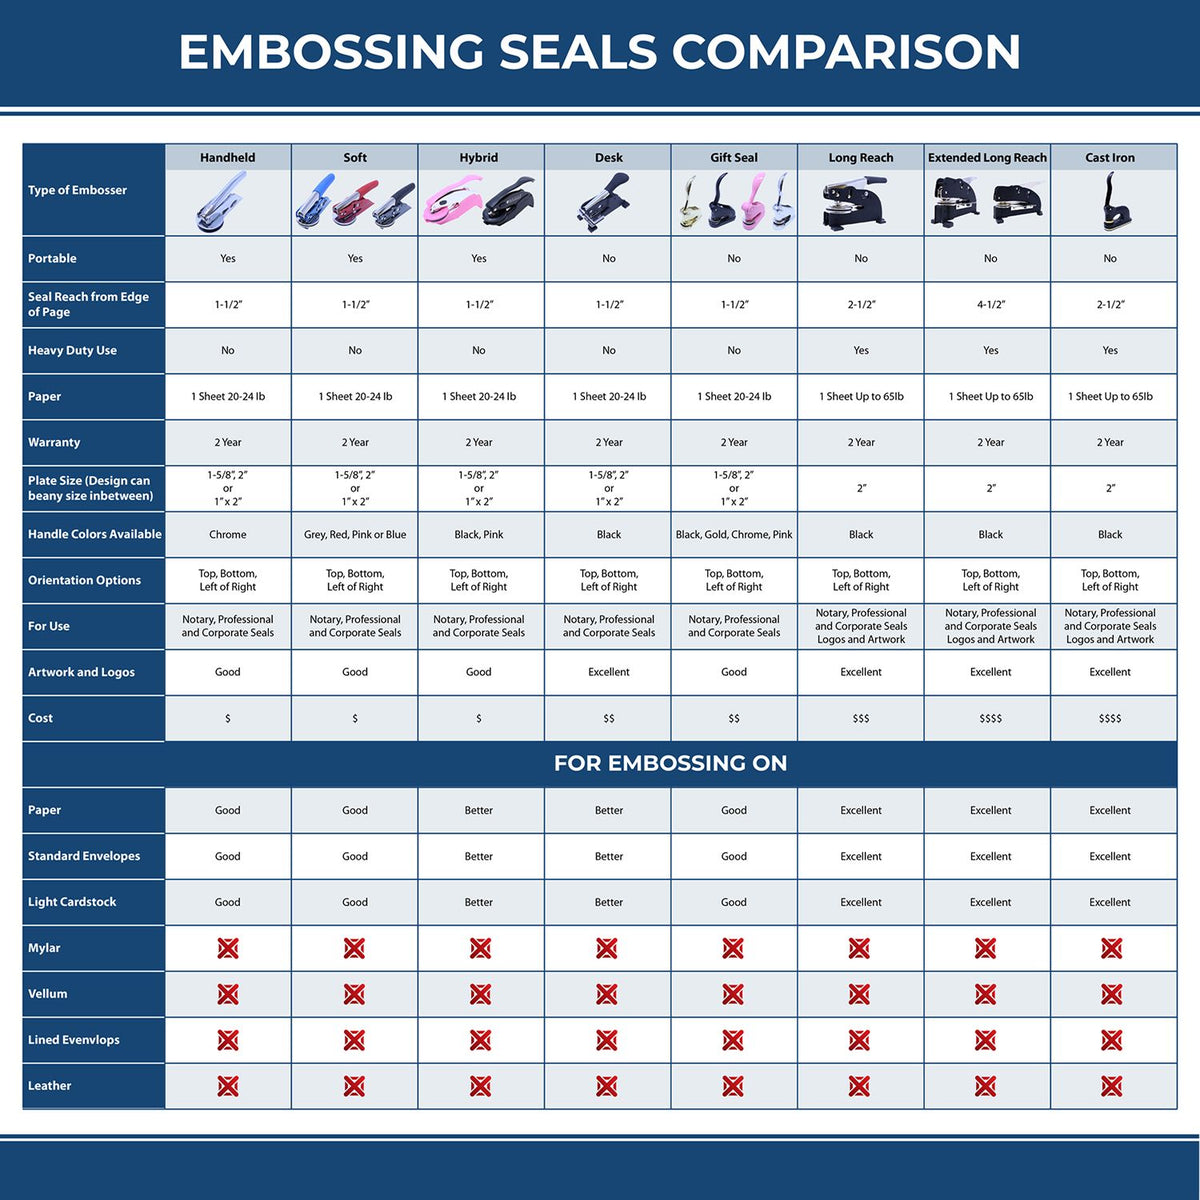 A comparison chart for the different types of mount models available for the Soft New Mexico Professional Engineer Seal.